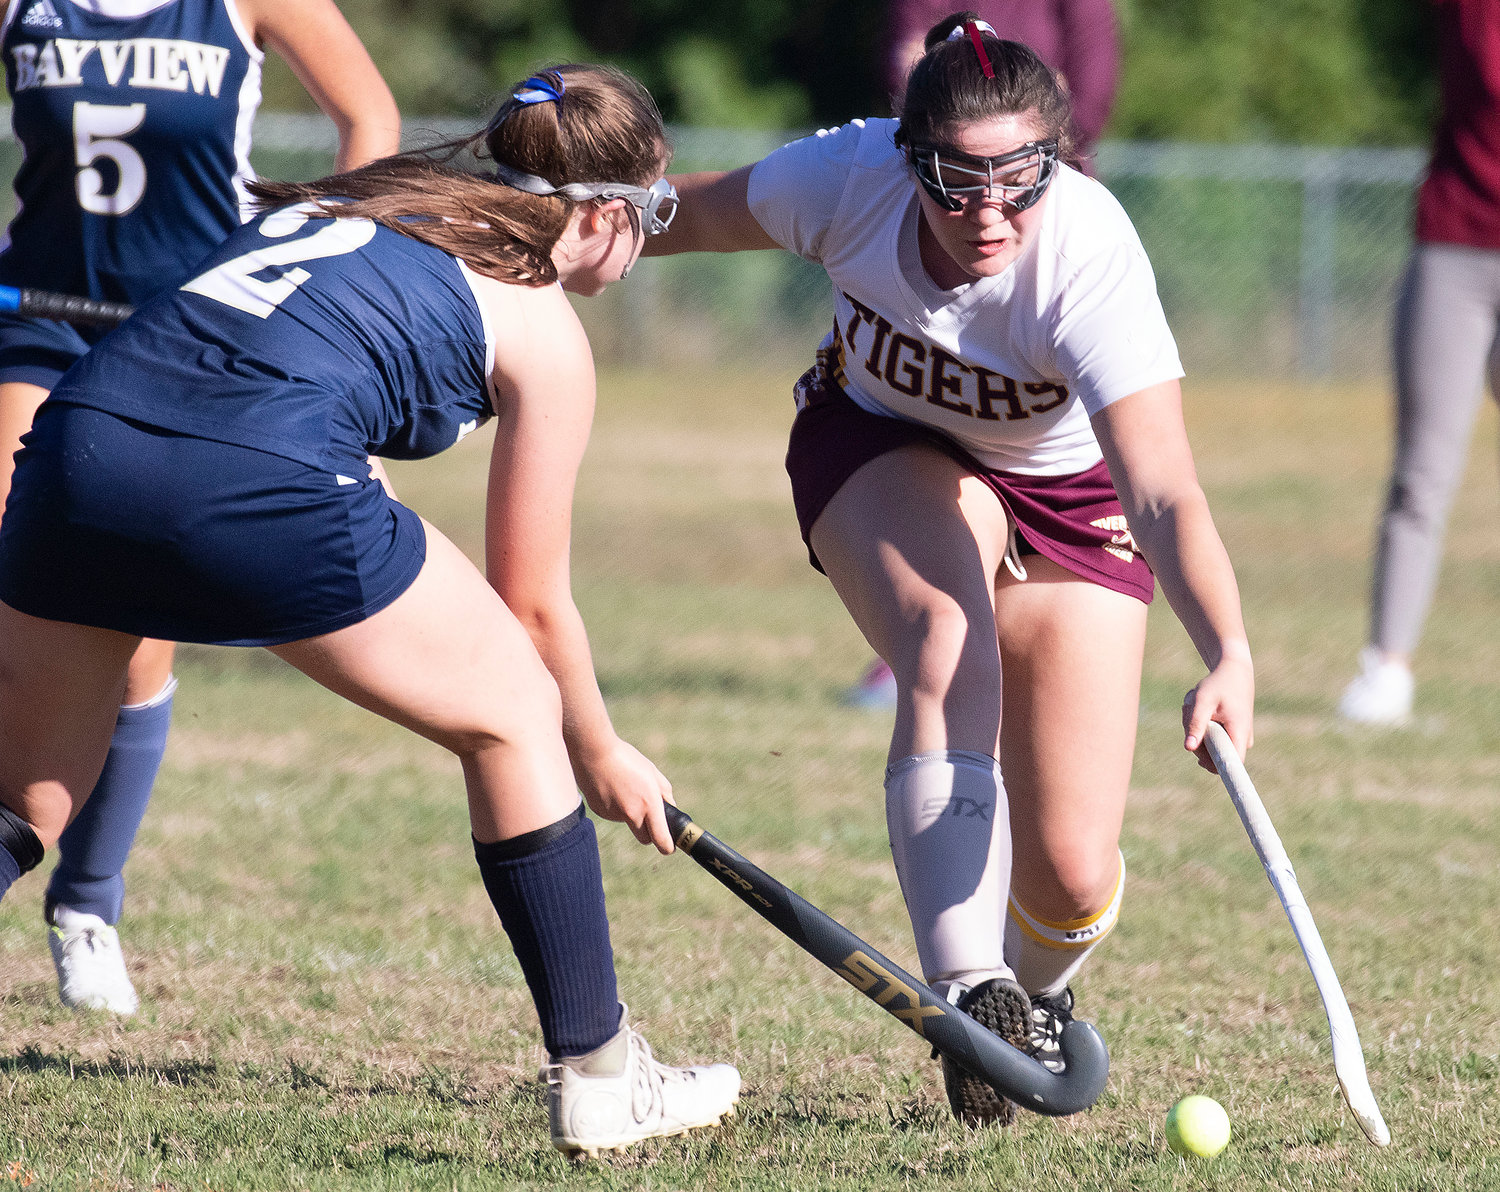 Senior midfielder Samantha Gacioch takes the ball from a Bay View forward at midfield during the Tiger’s game against St. Mary Academy on Thursday. Gacioch scored three goals for the Tiverton in the 7-0 win.